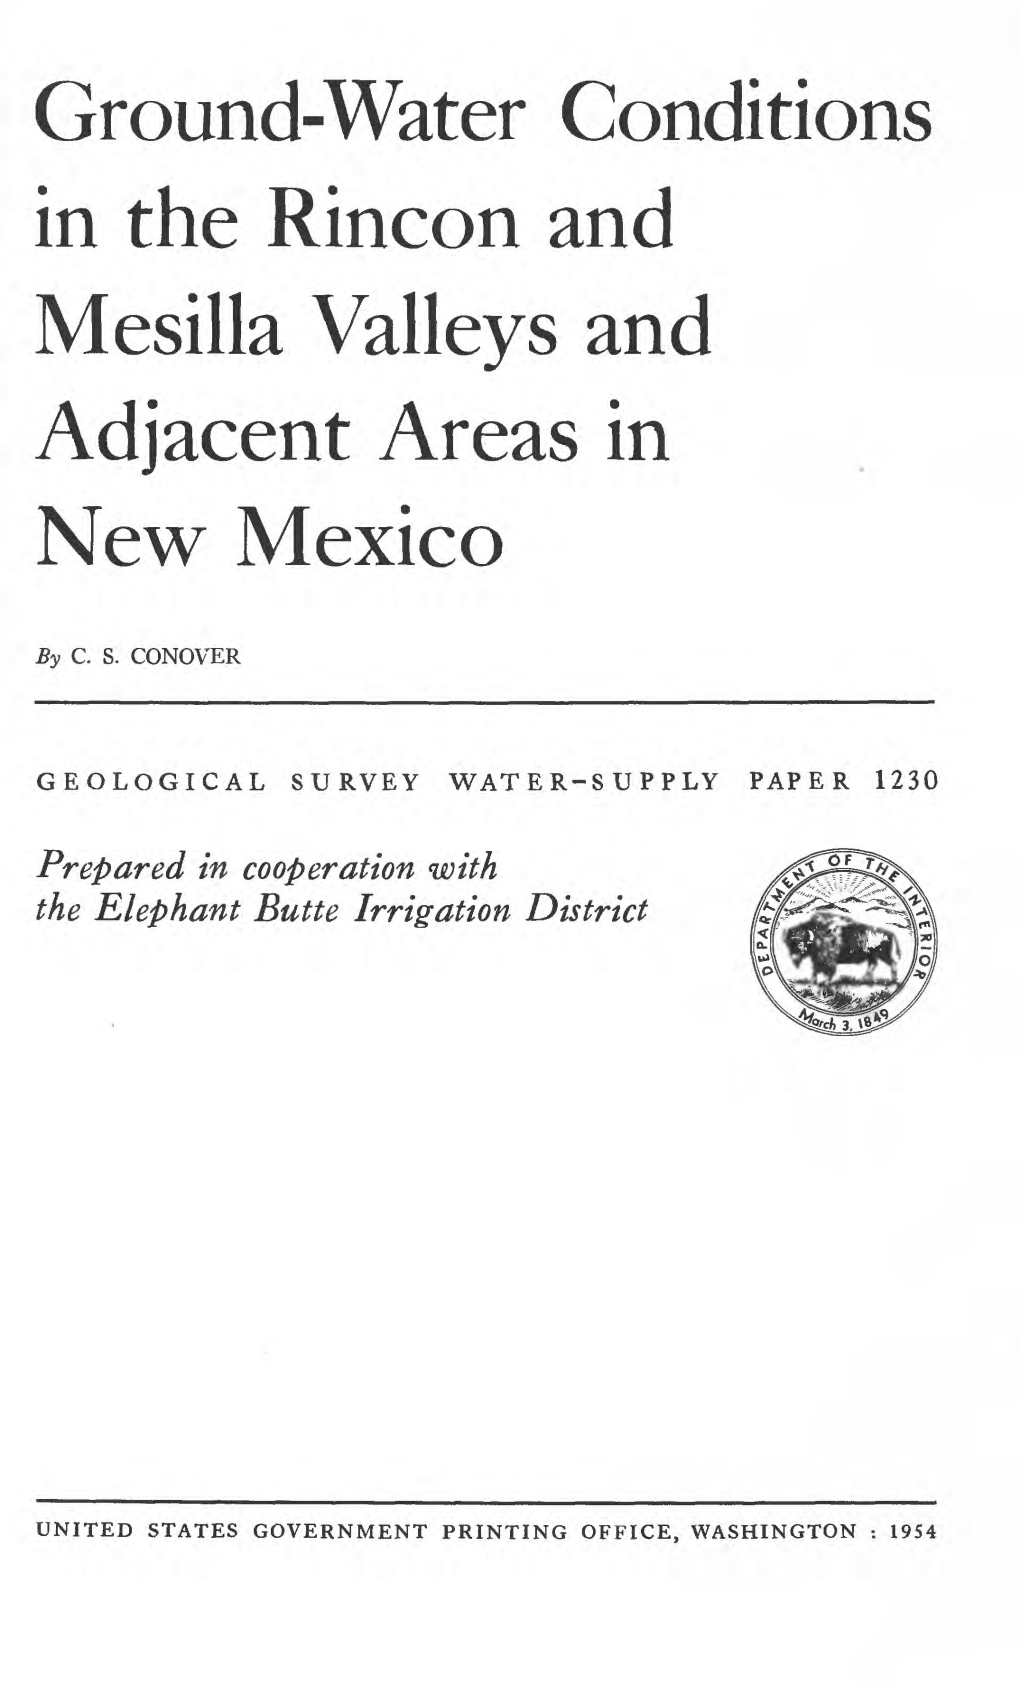 Ground-Water Conditions in the Rincon and Mesilla Valleys and Adjacent Areas in New Mexico